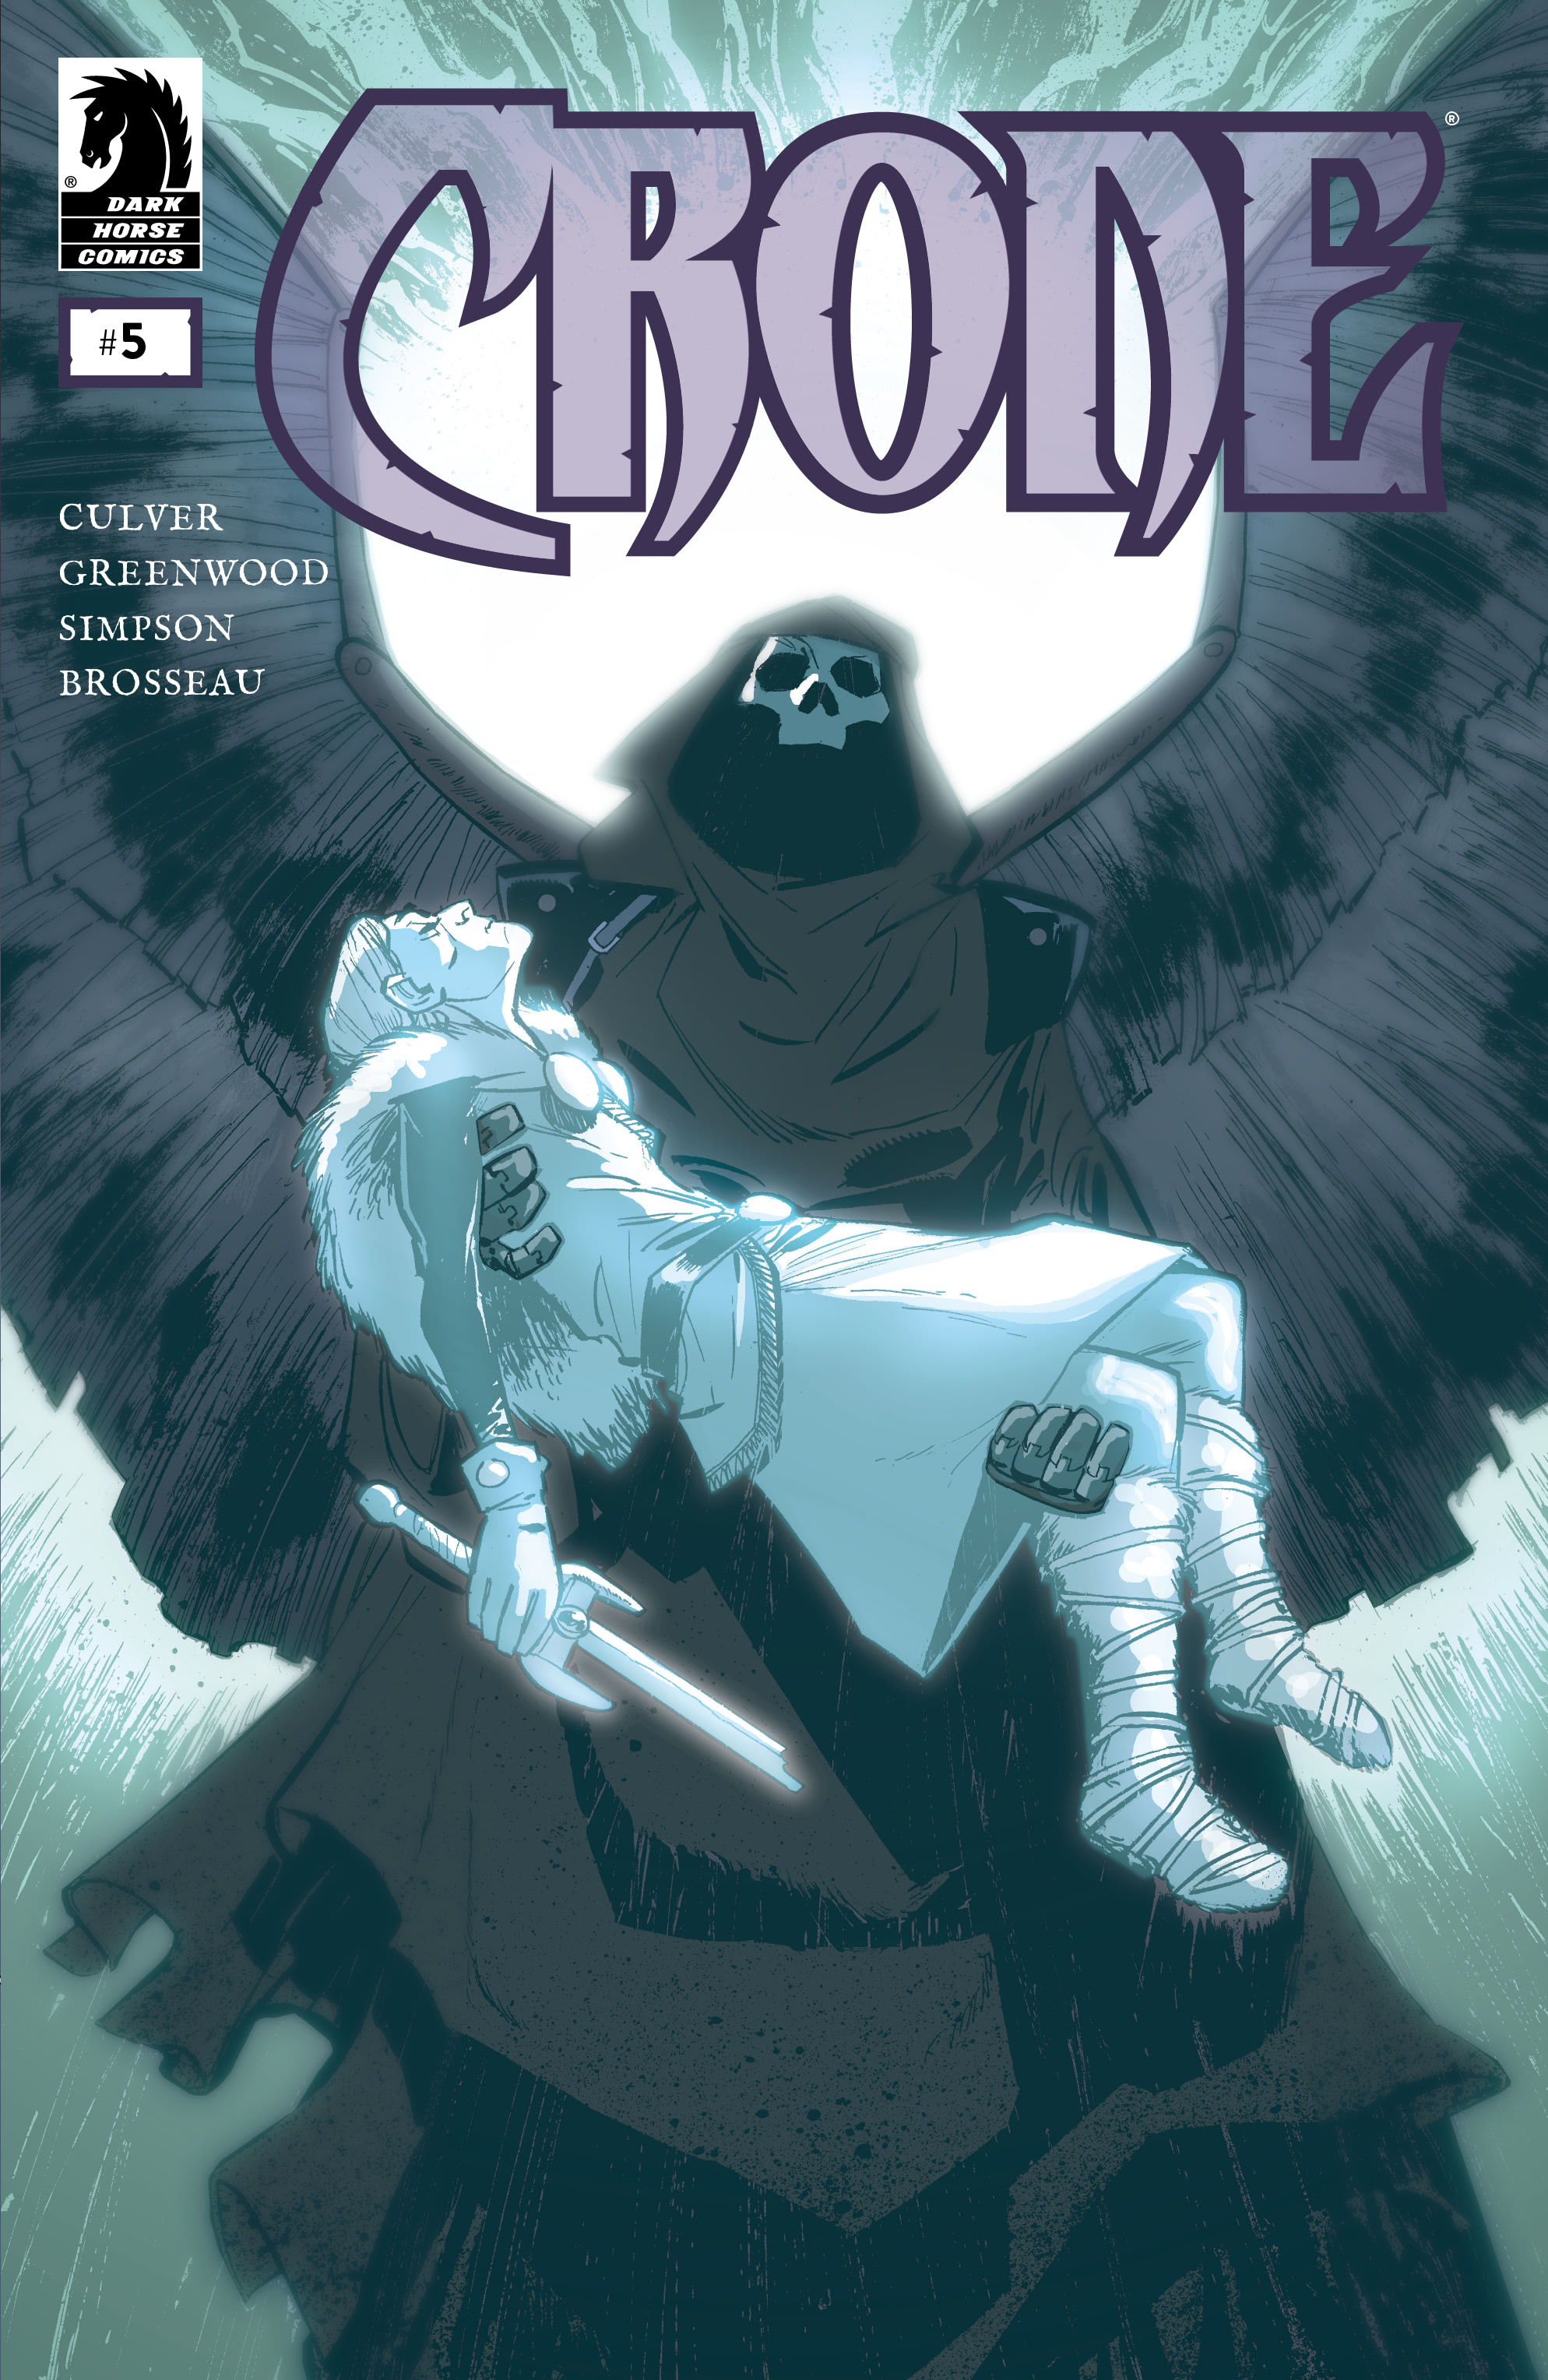 Read online Crone comic -  Issue #5 - 1